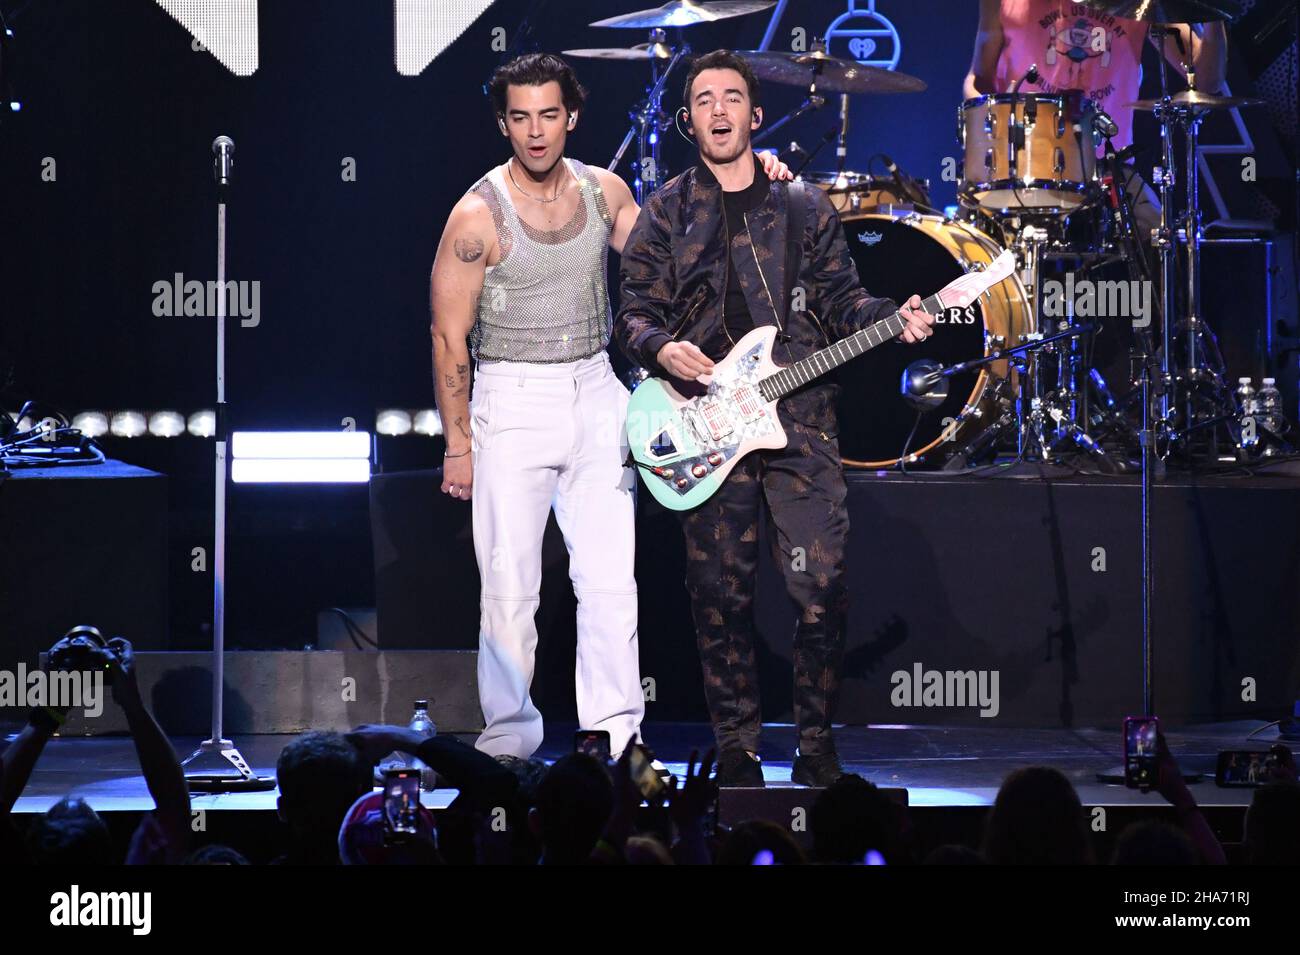 New York, USA. 10th Dec, 2021. (L-R) Joe Jonas and Kevin Jonas of the Jonas Brothers perform during the Z100's iHeart Radio Jingle Ball 2021 show at Madison Square Garden in New York, NY, December 10, 2021. (Photo by Anthony Behar/Sipa USA) Credit: Sipa USA/Alamy Live News Stock Photo